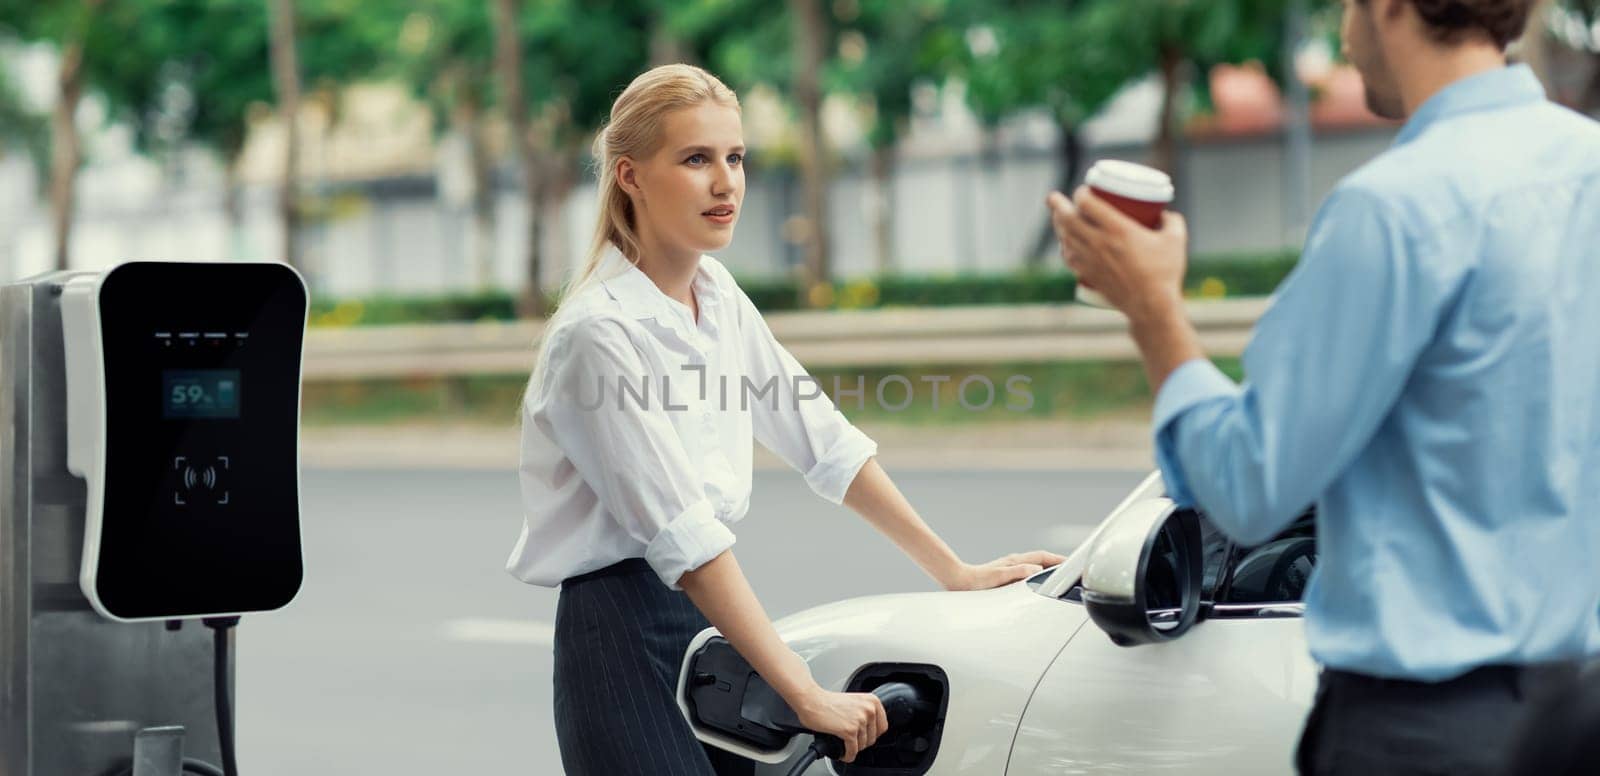 Progressive businessman and businesswoman at charging point and EV car by biancoblue